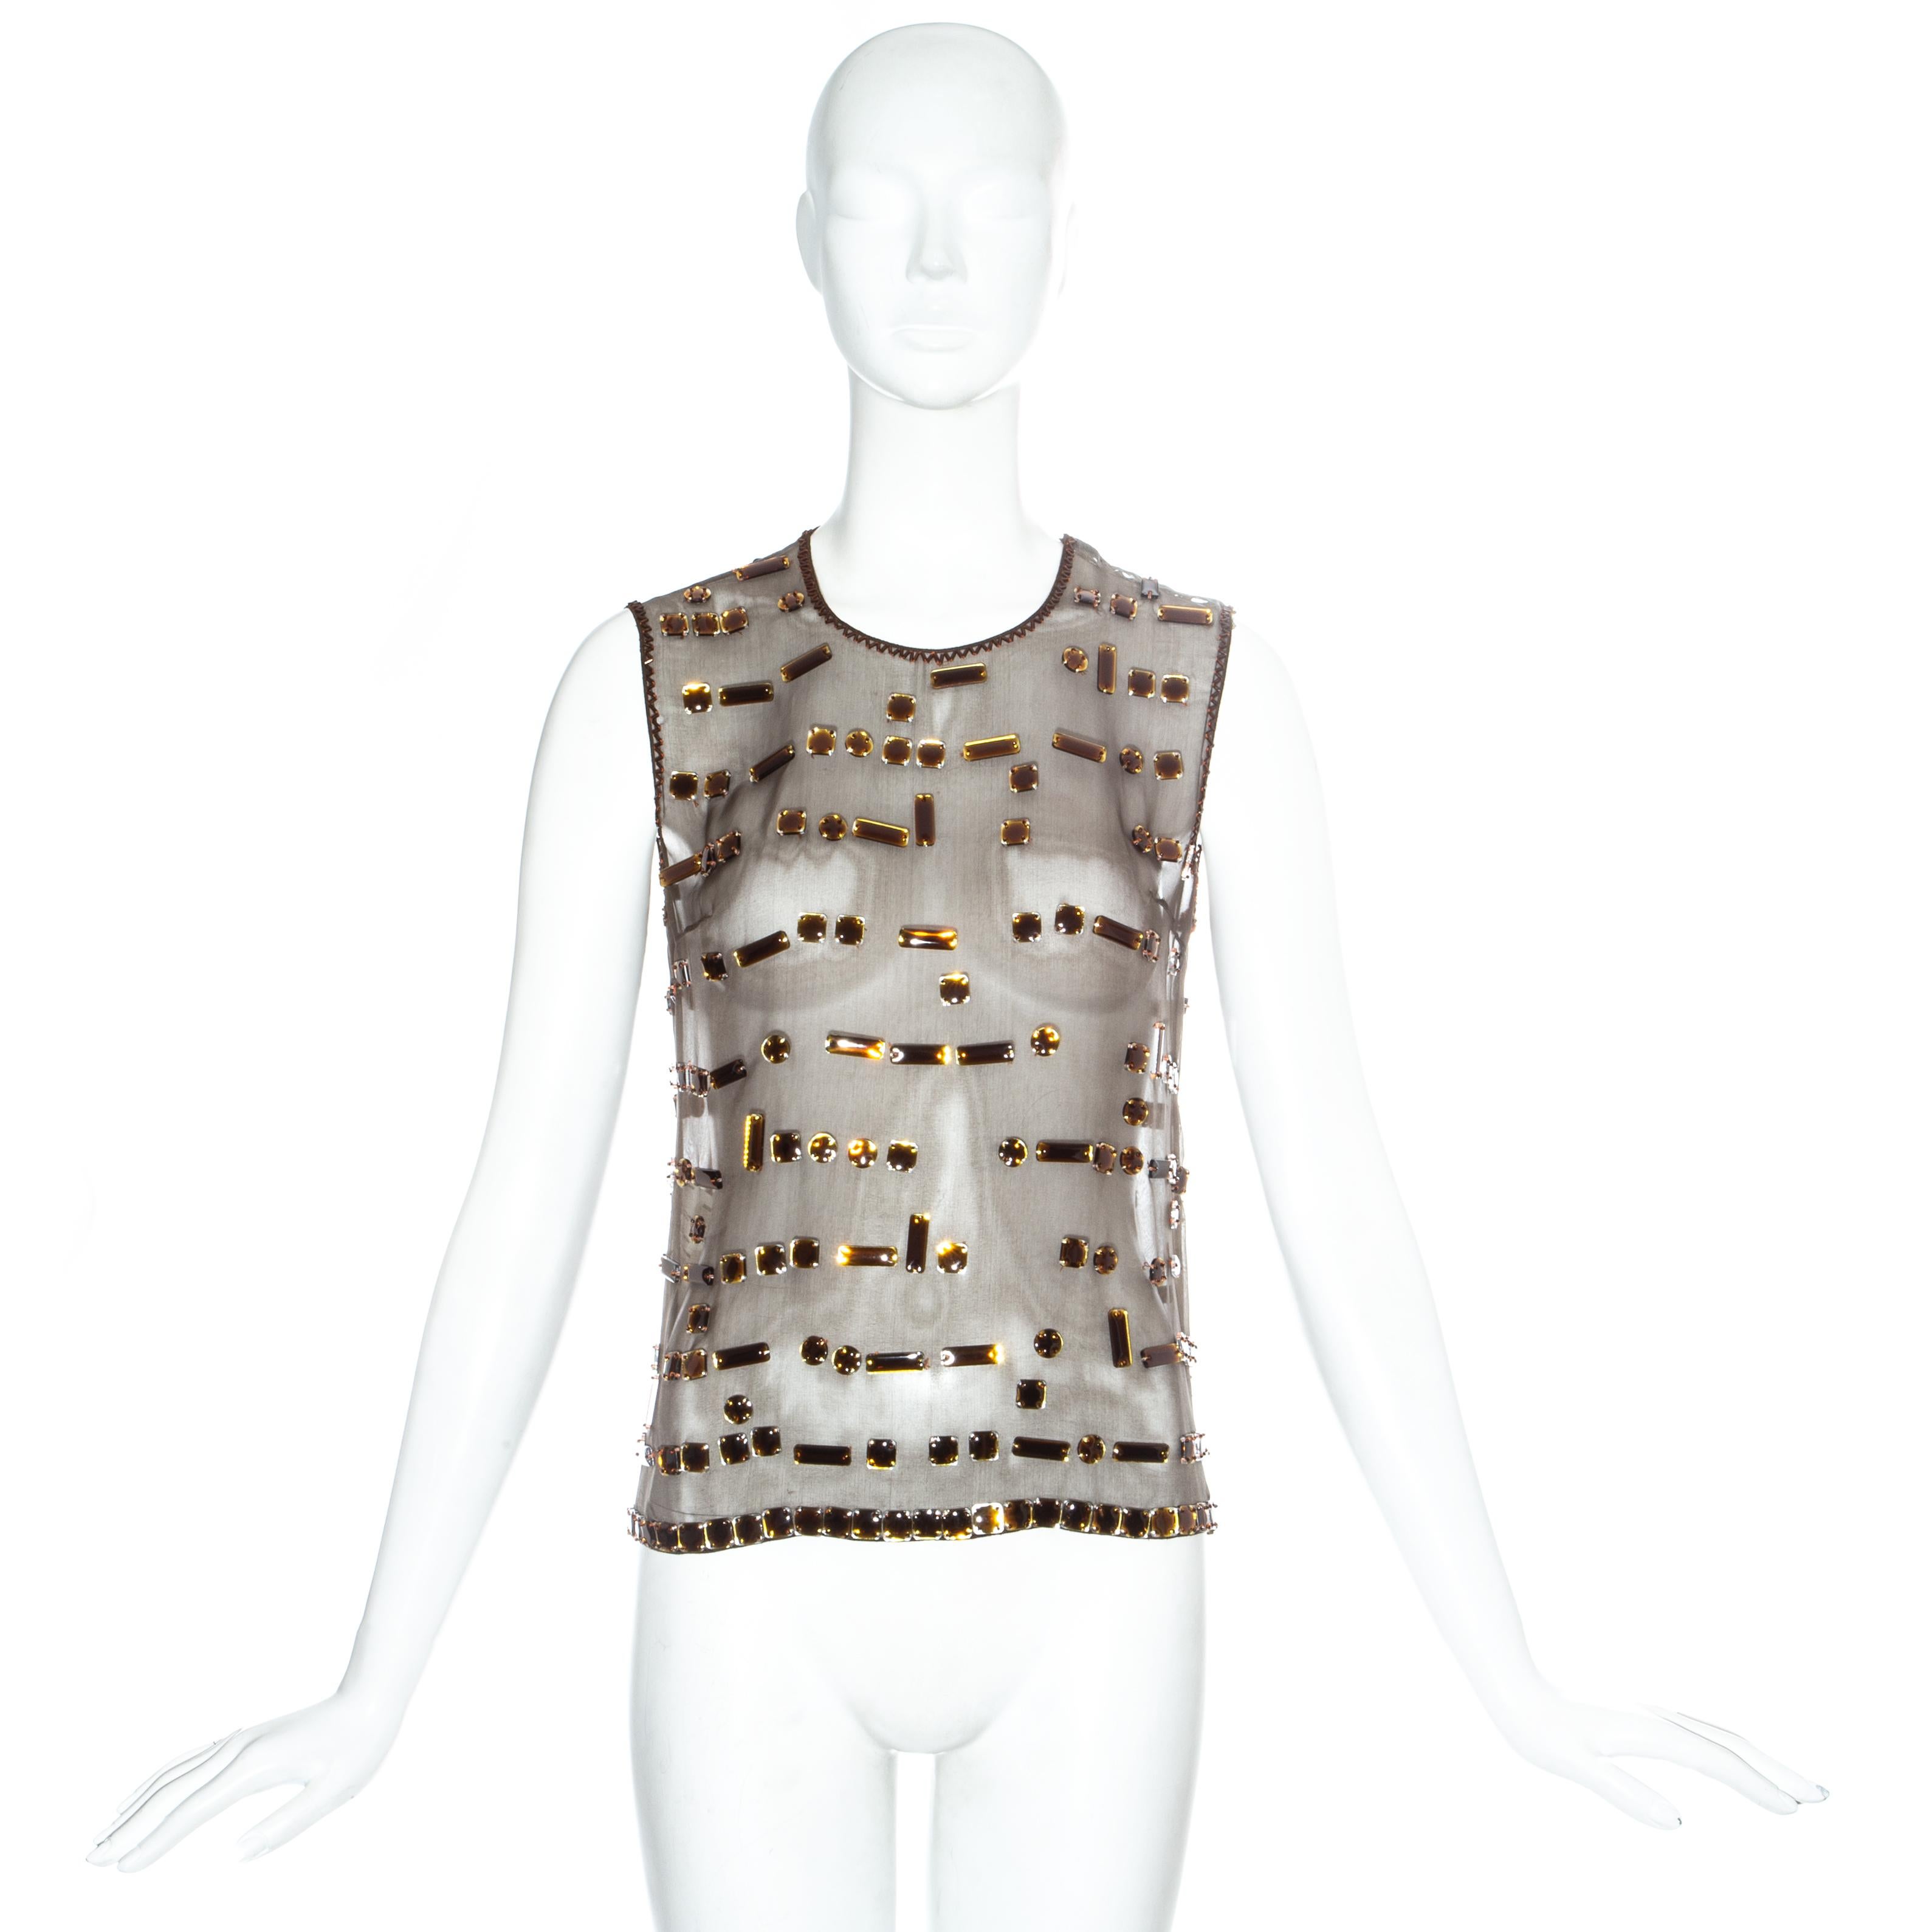 Prada silk organza jewelled evening vest with open back and beaded trim

Fall-Winter 1999